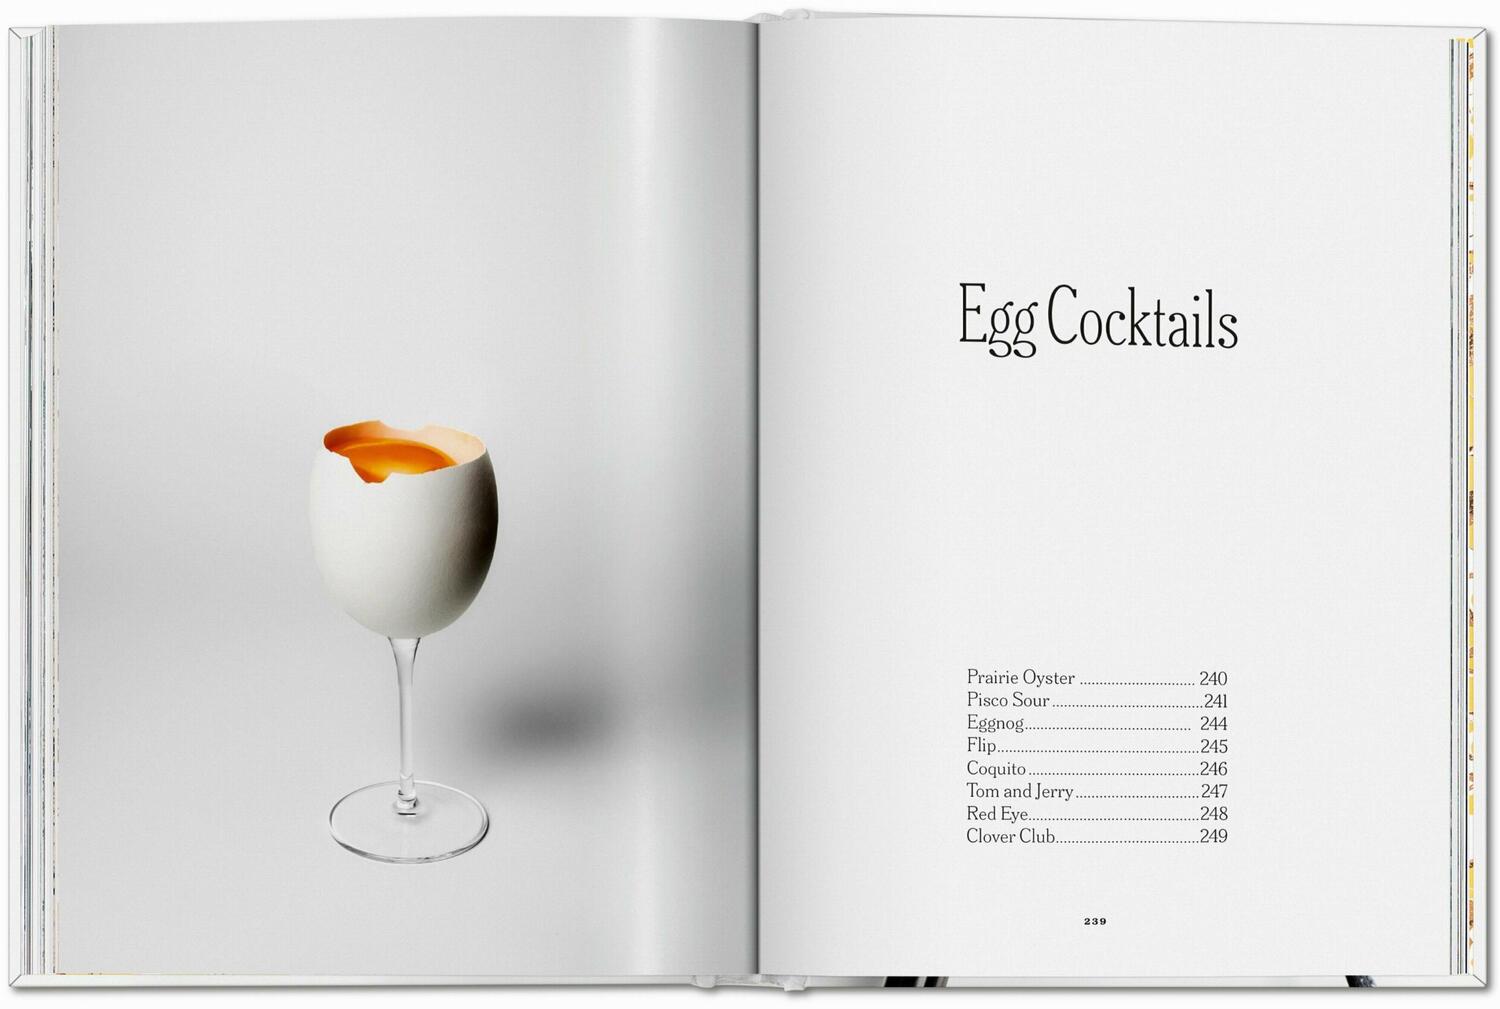 Bild: 9783836585897 | The Gourmand's Egg. A Collection of Stories and Recipes | The Gourmand